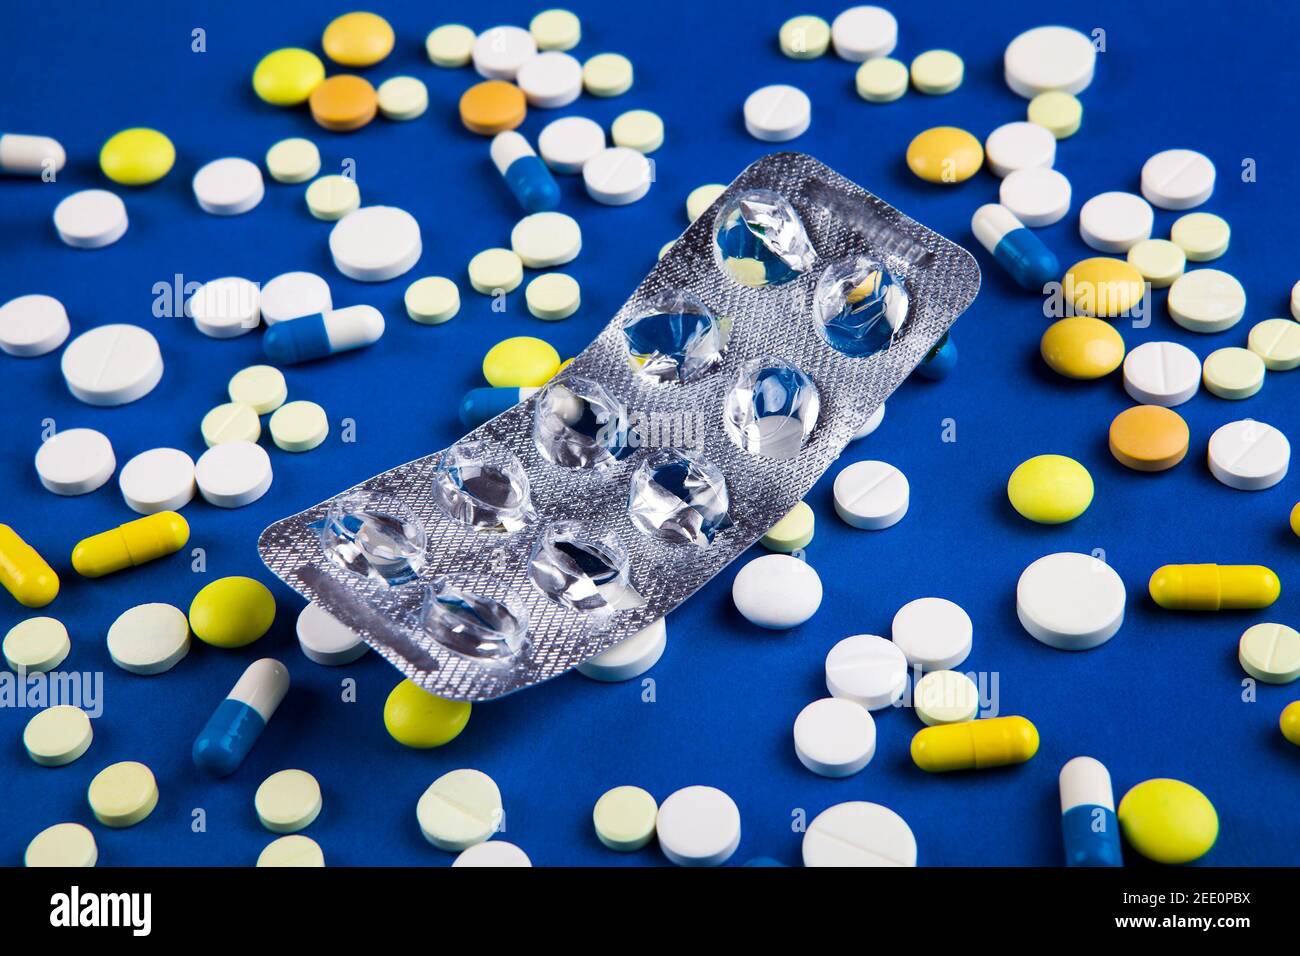 Empty Pack on the Scattering Pills and Blue Paper Background Stock Photo